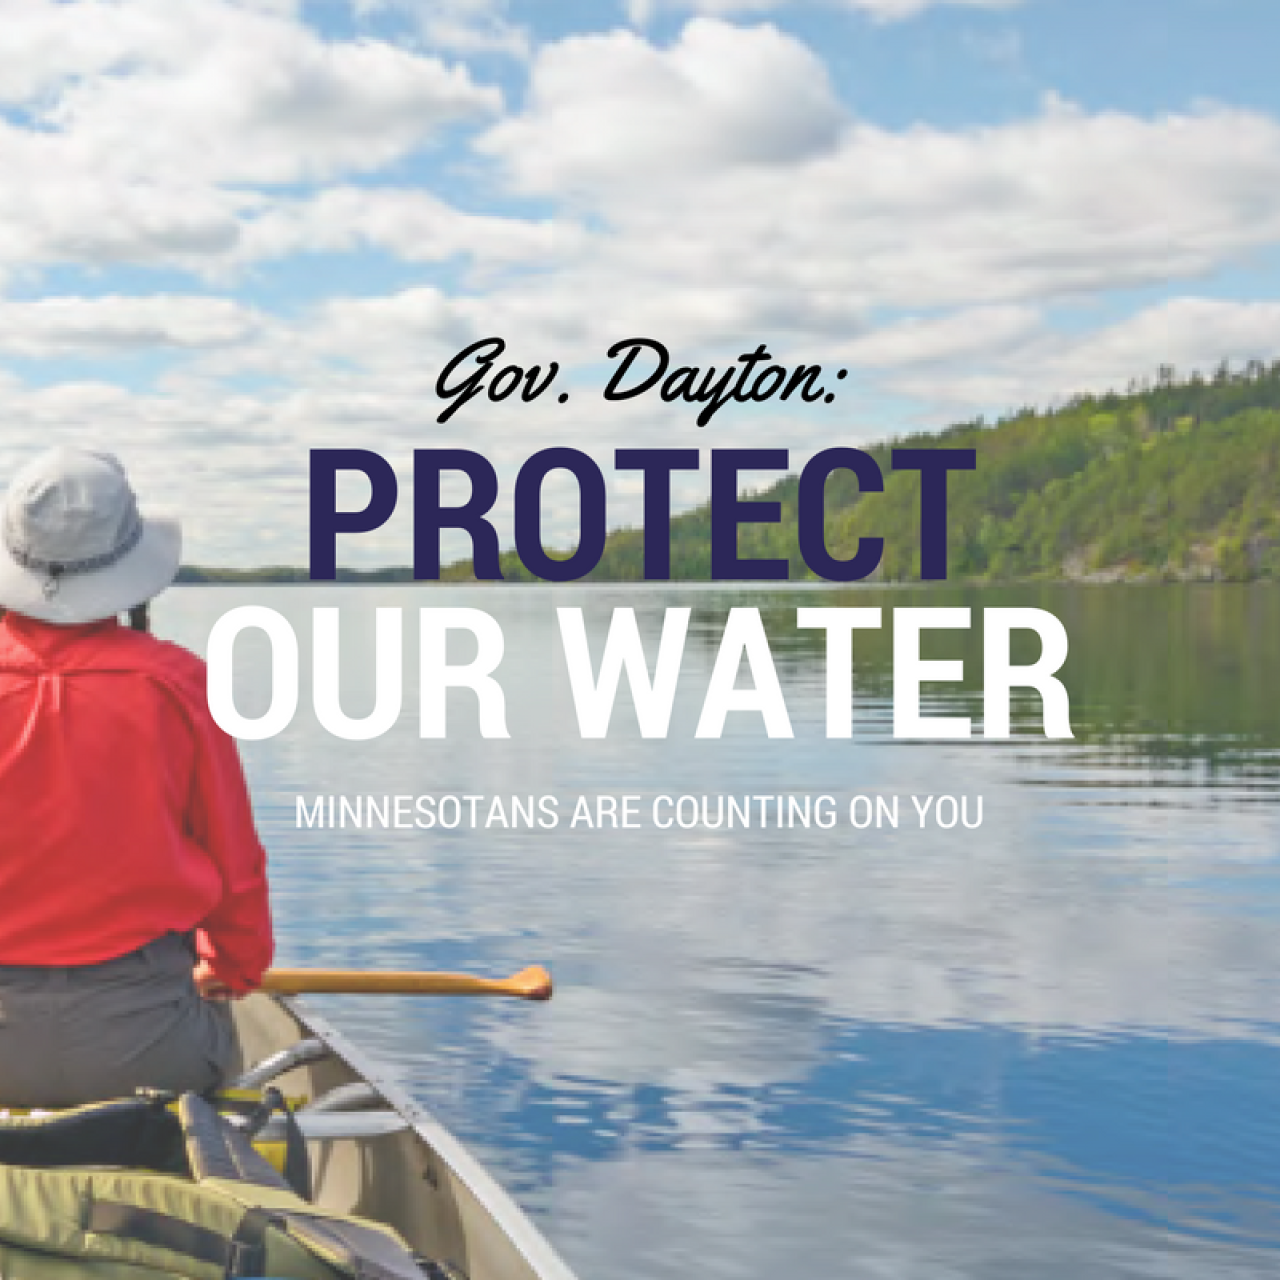 Gov. Dayton: Protect Our Water